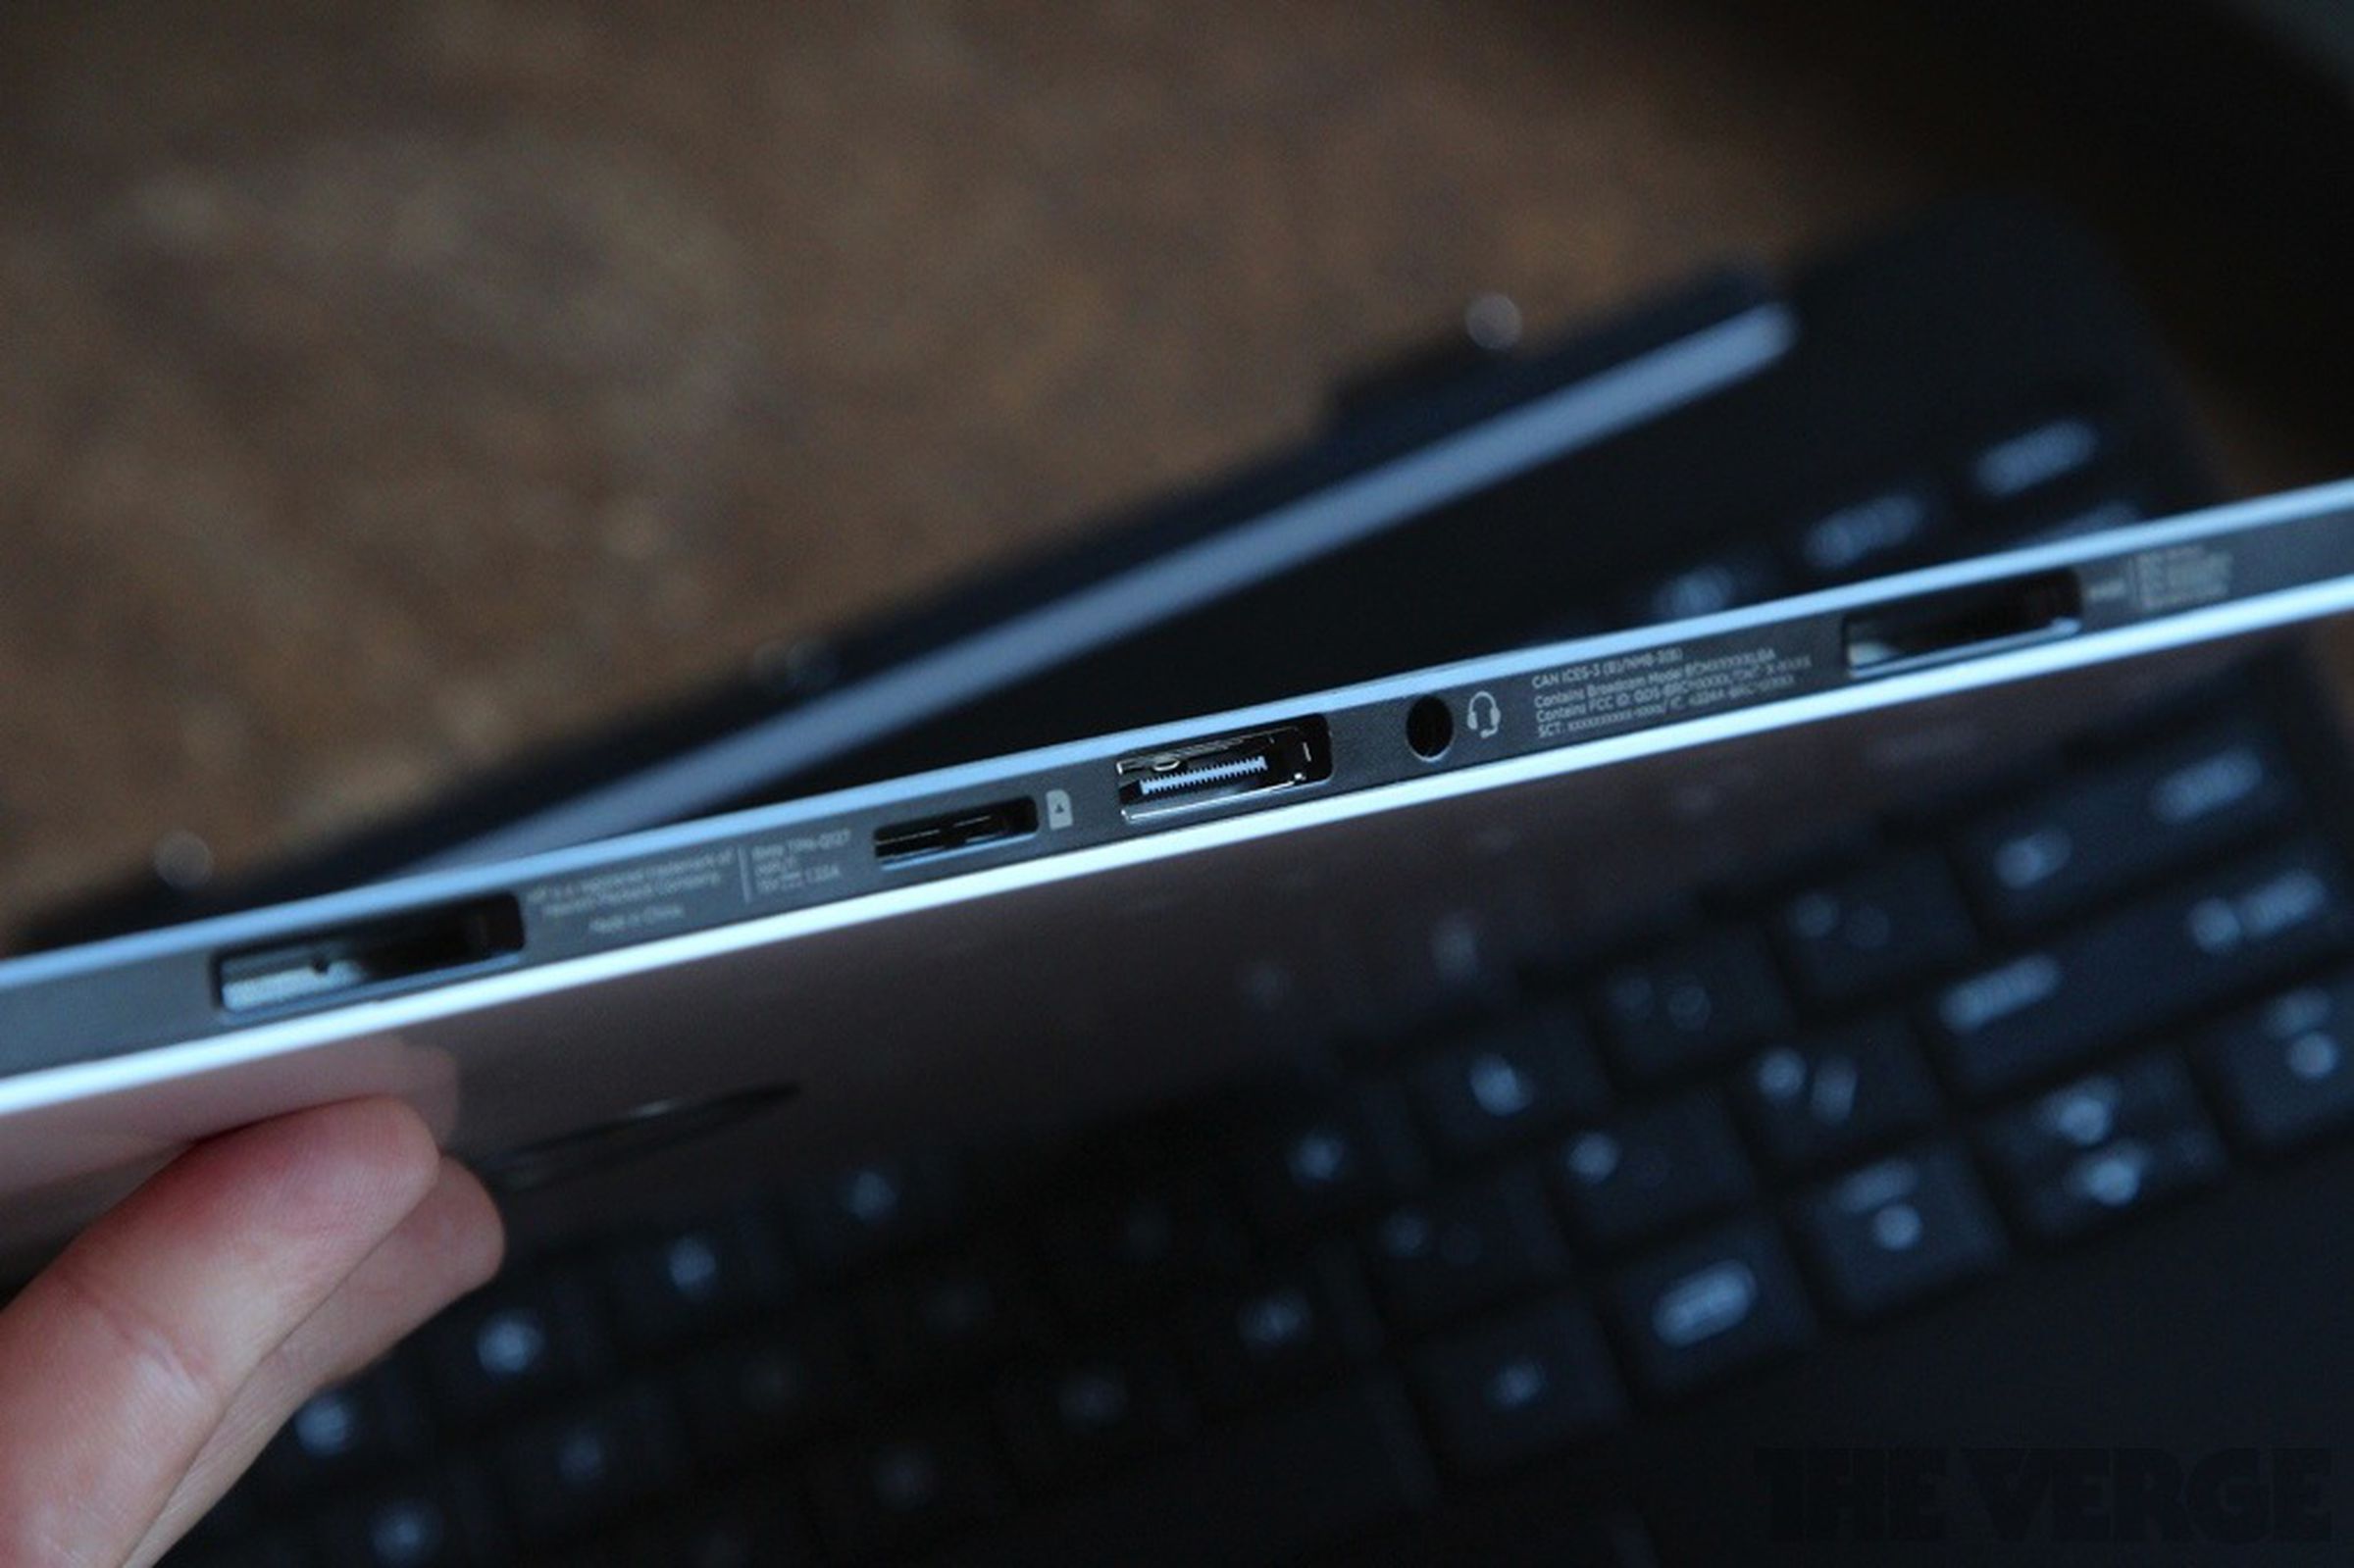 HP Slatebook x2 and Split x2 hands-on pictures